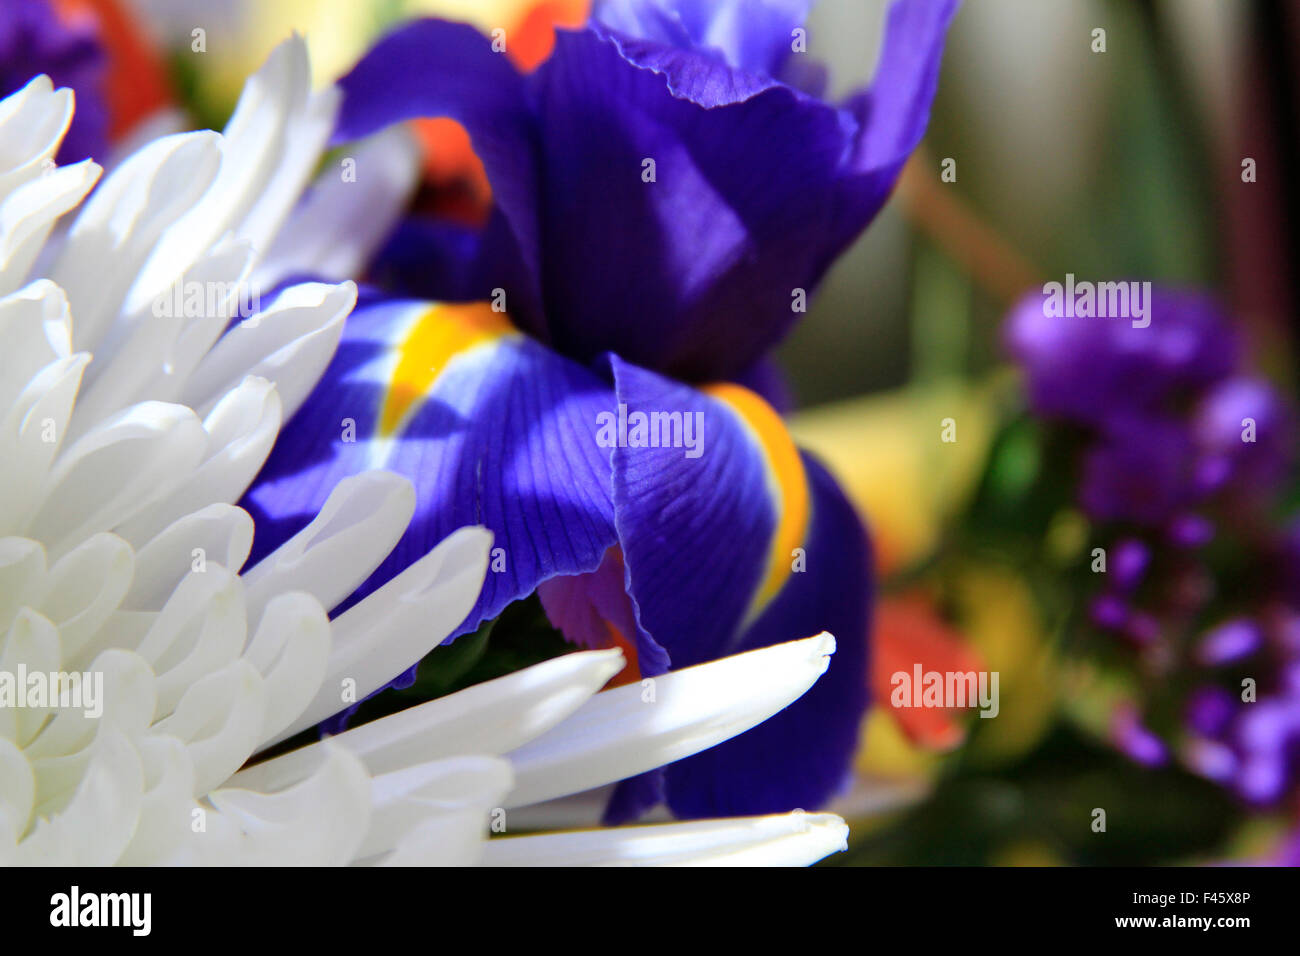 Bold blue and gold colored Iris flower petals up close Stock Photo